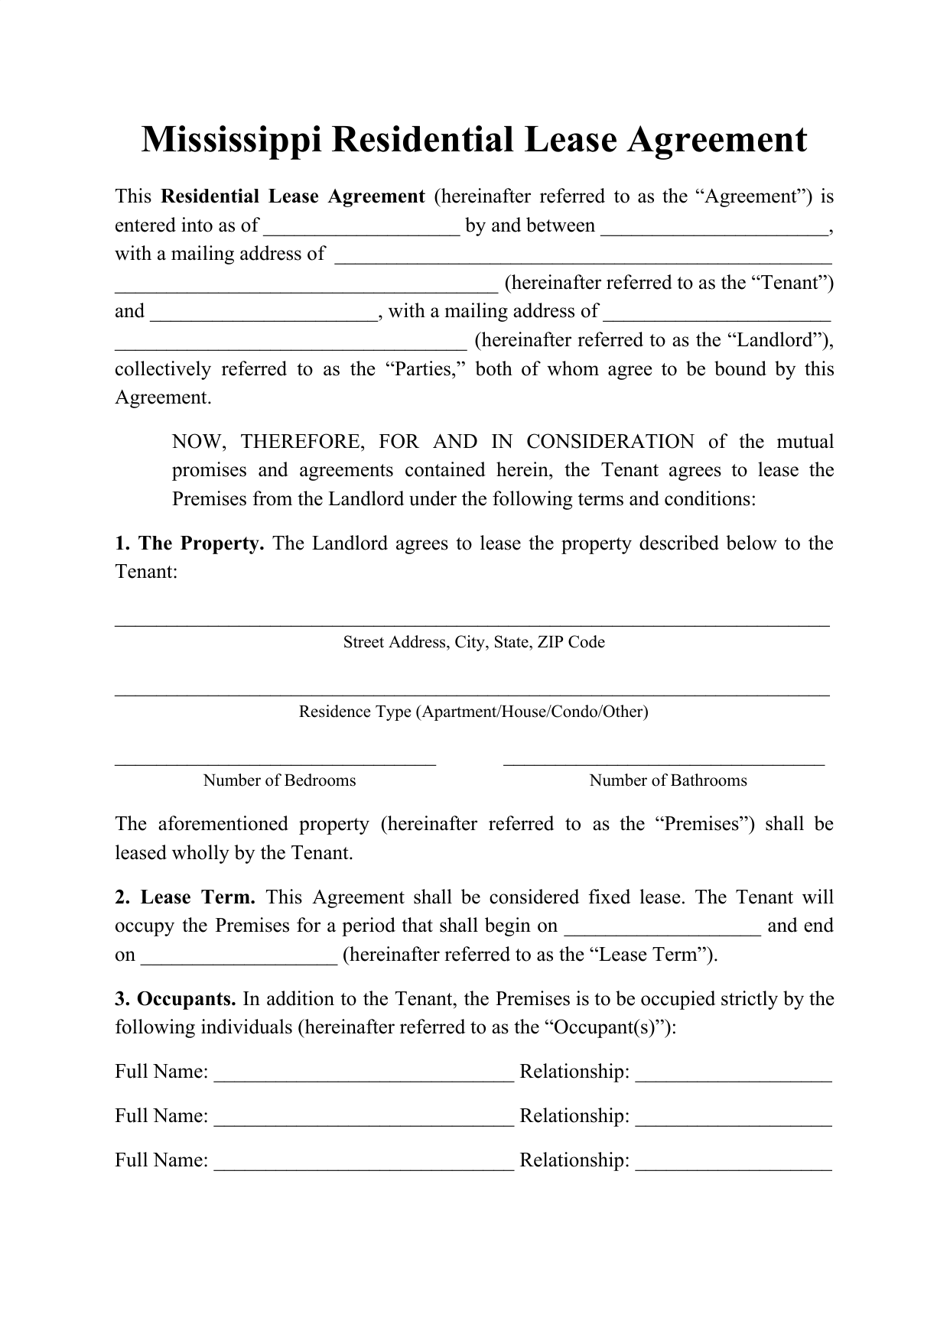 Residential Lease Agreement Template - Mississippi, Page 1